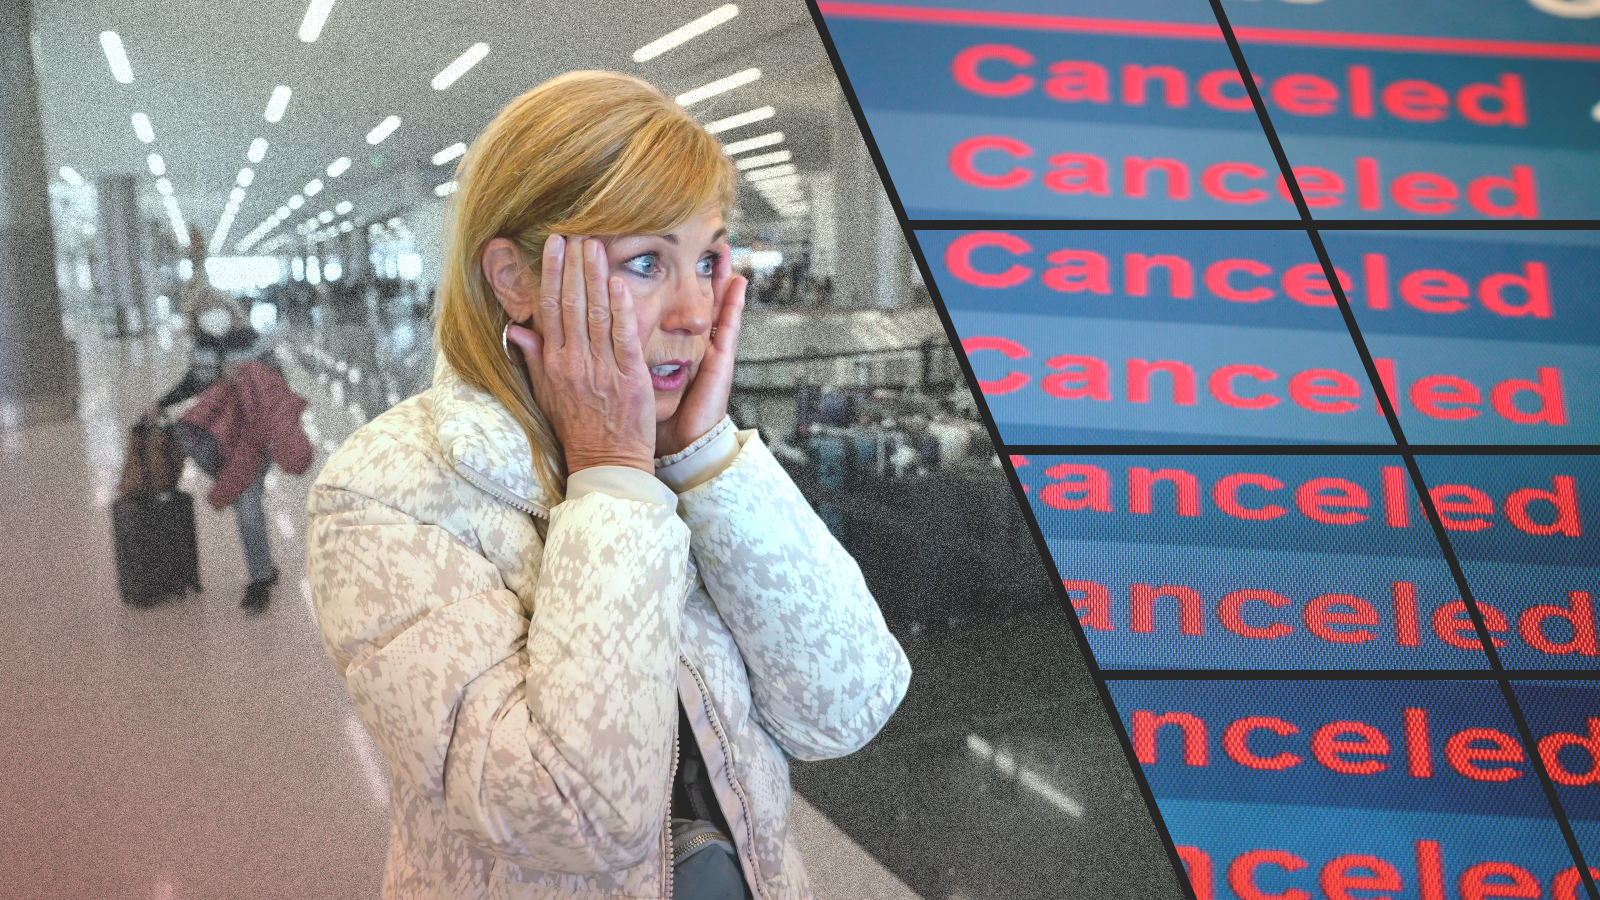 On the left, a woman looks stressed at an airport. On the right, a screen shows multiple canceled flights.